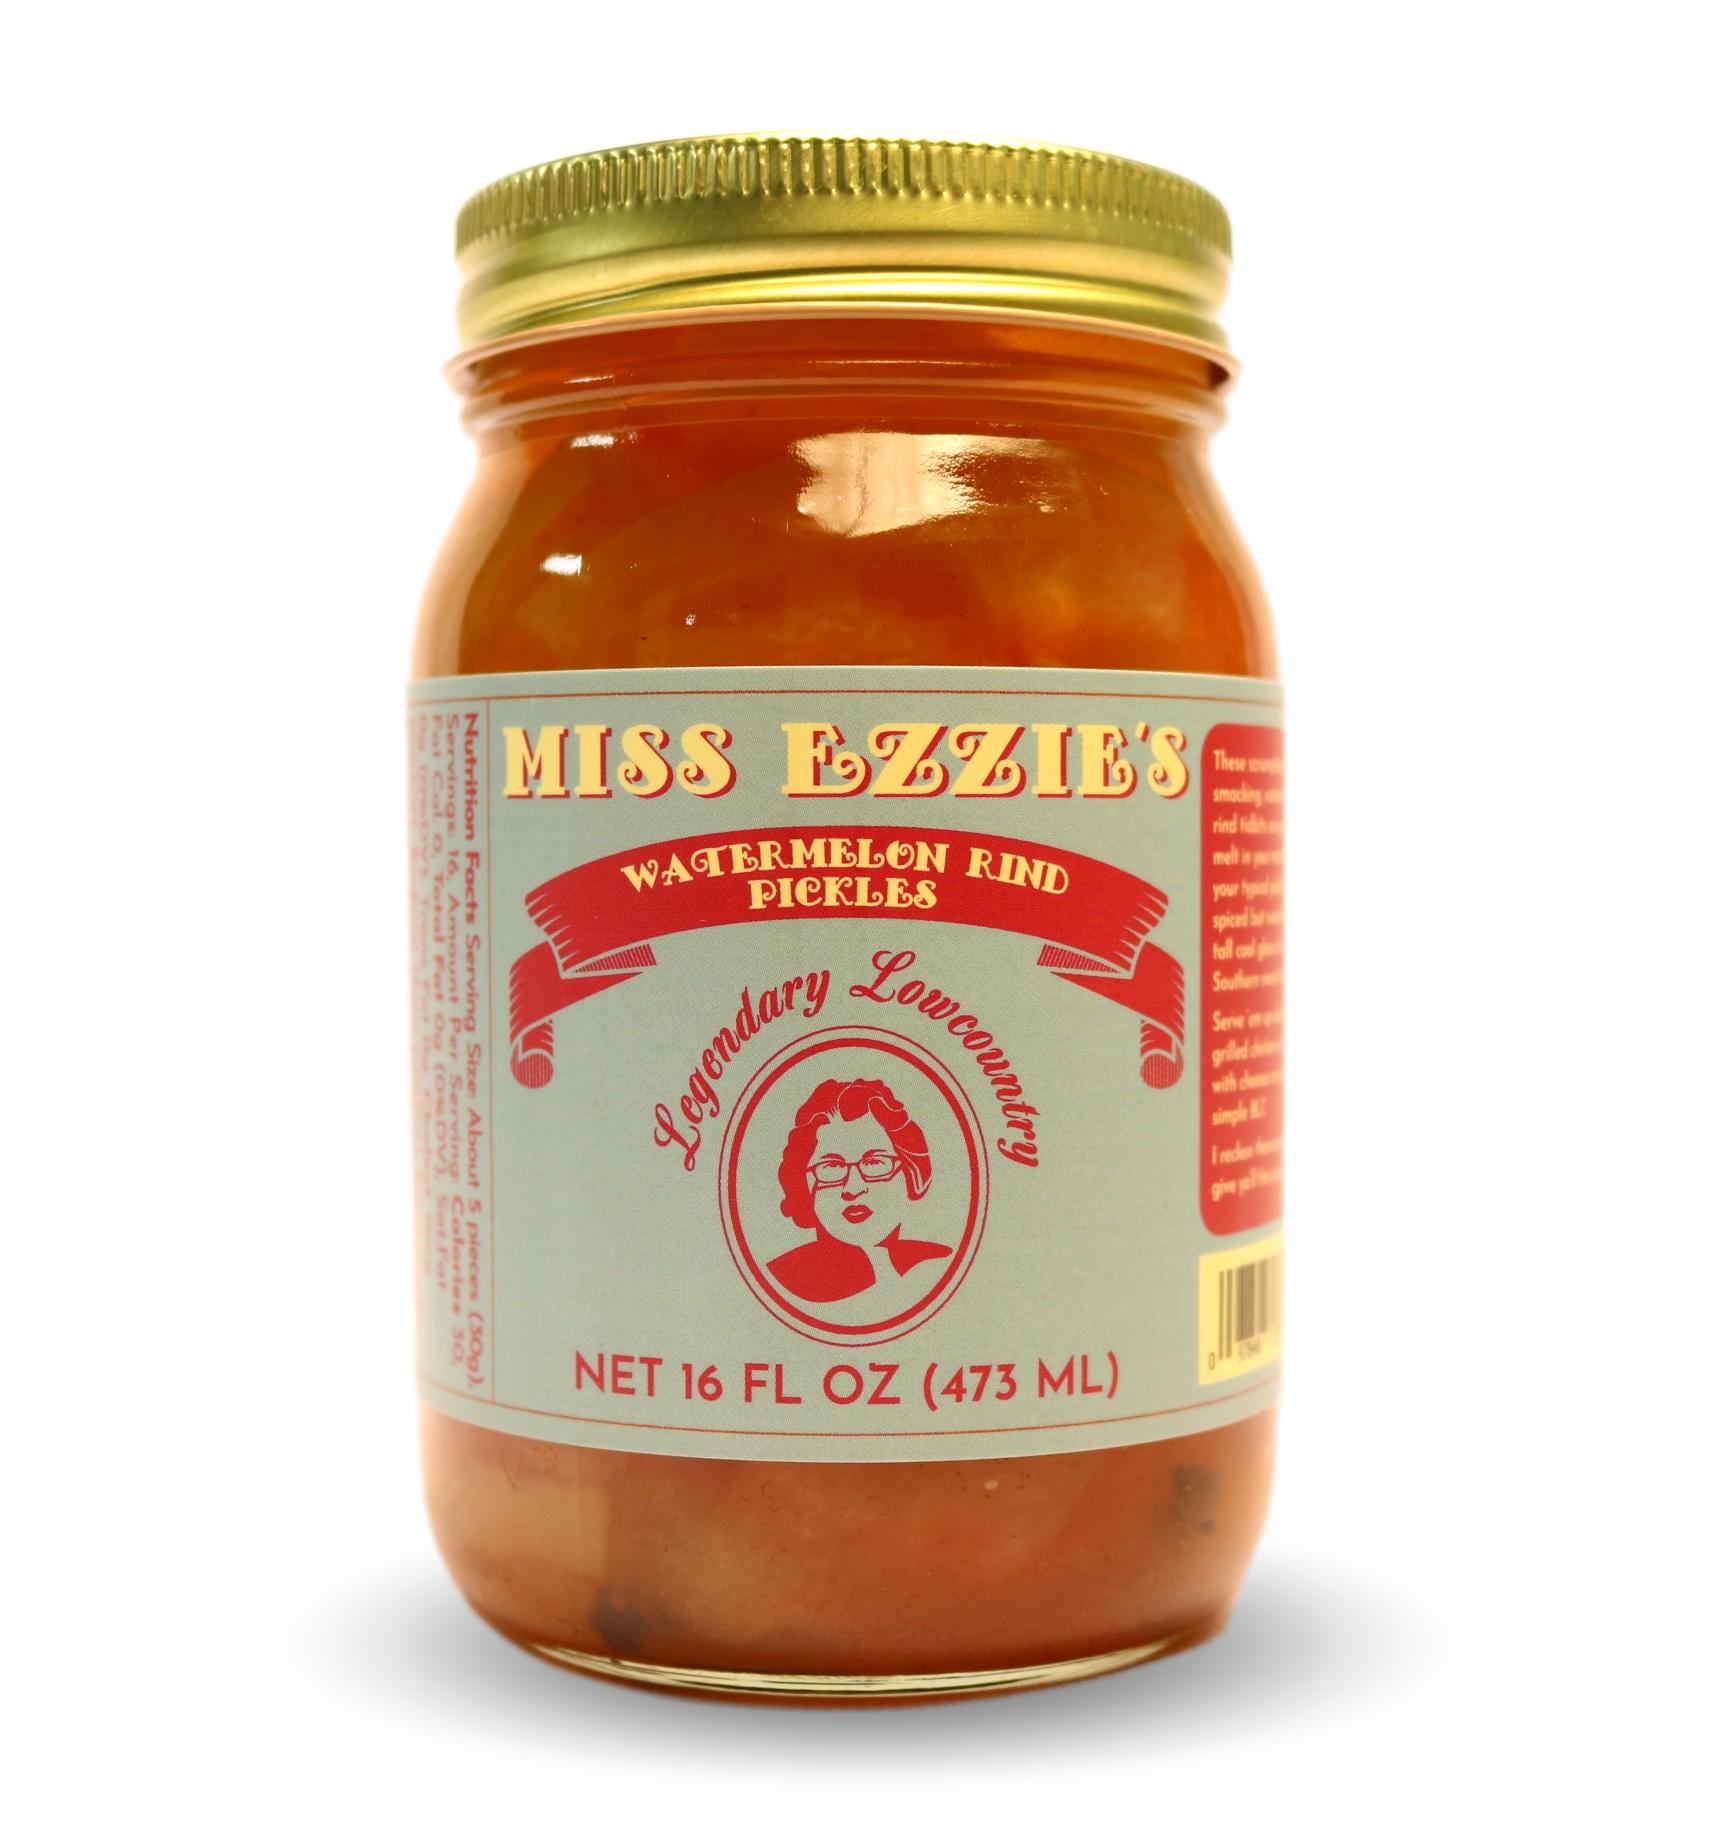 https://cdn.shopify.com/s/files/1/0798/7885/products/Miss_Ezzie_Watermelon_Rind_Pickles.jpg?v=1668283287